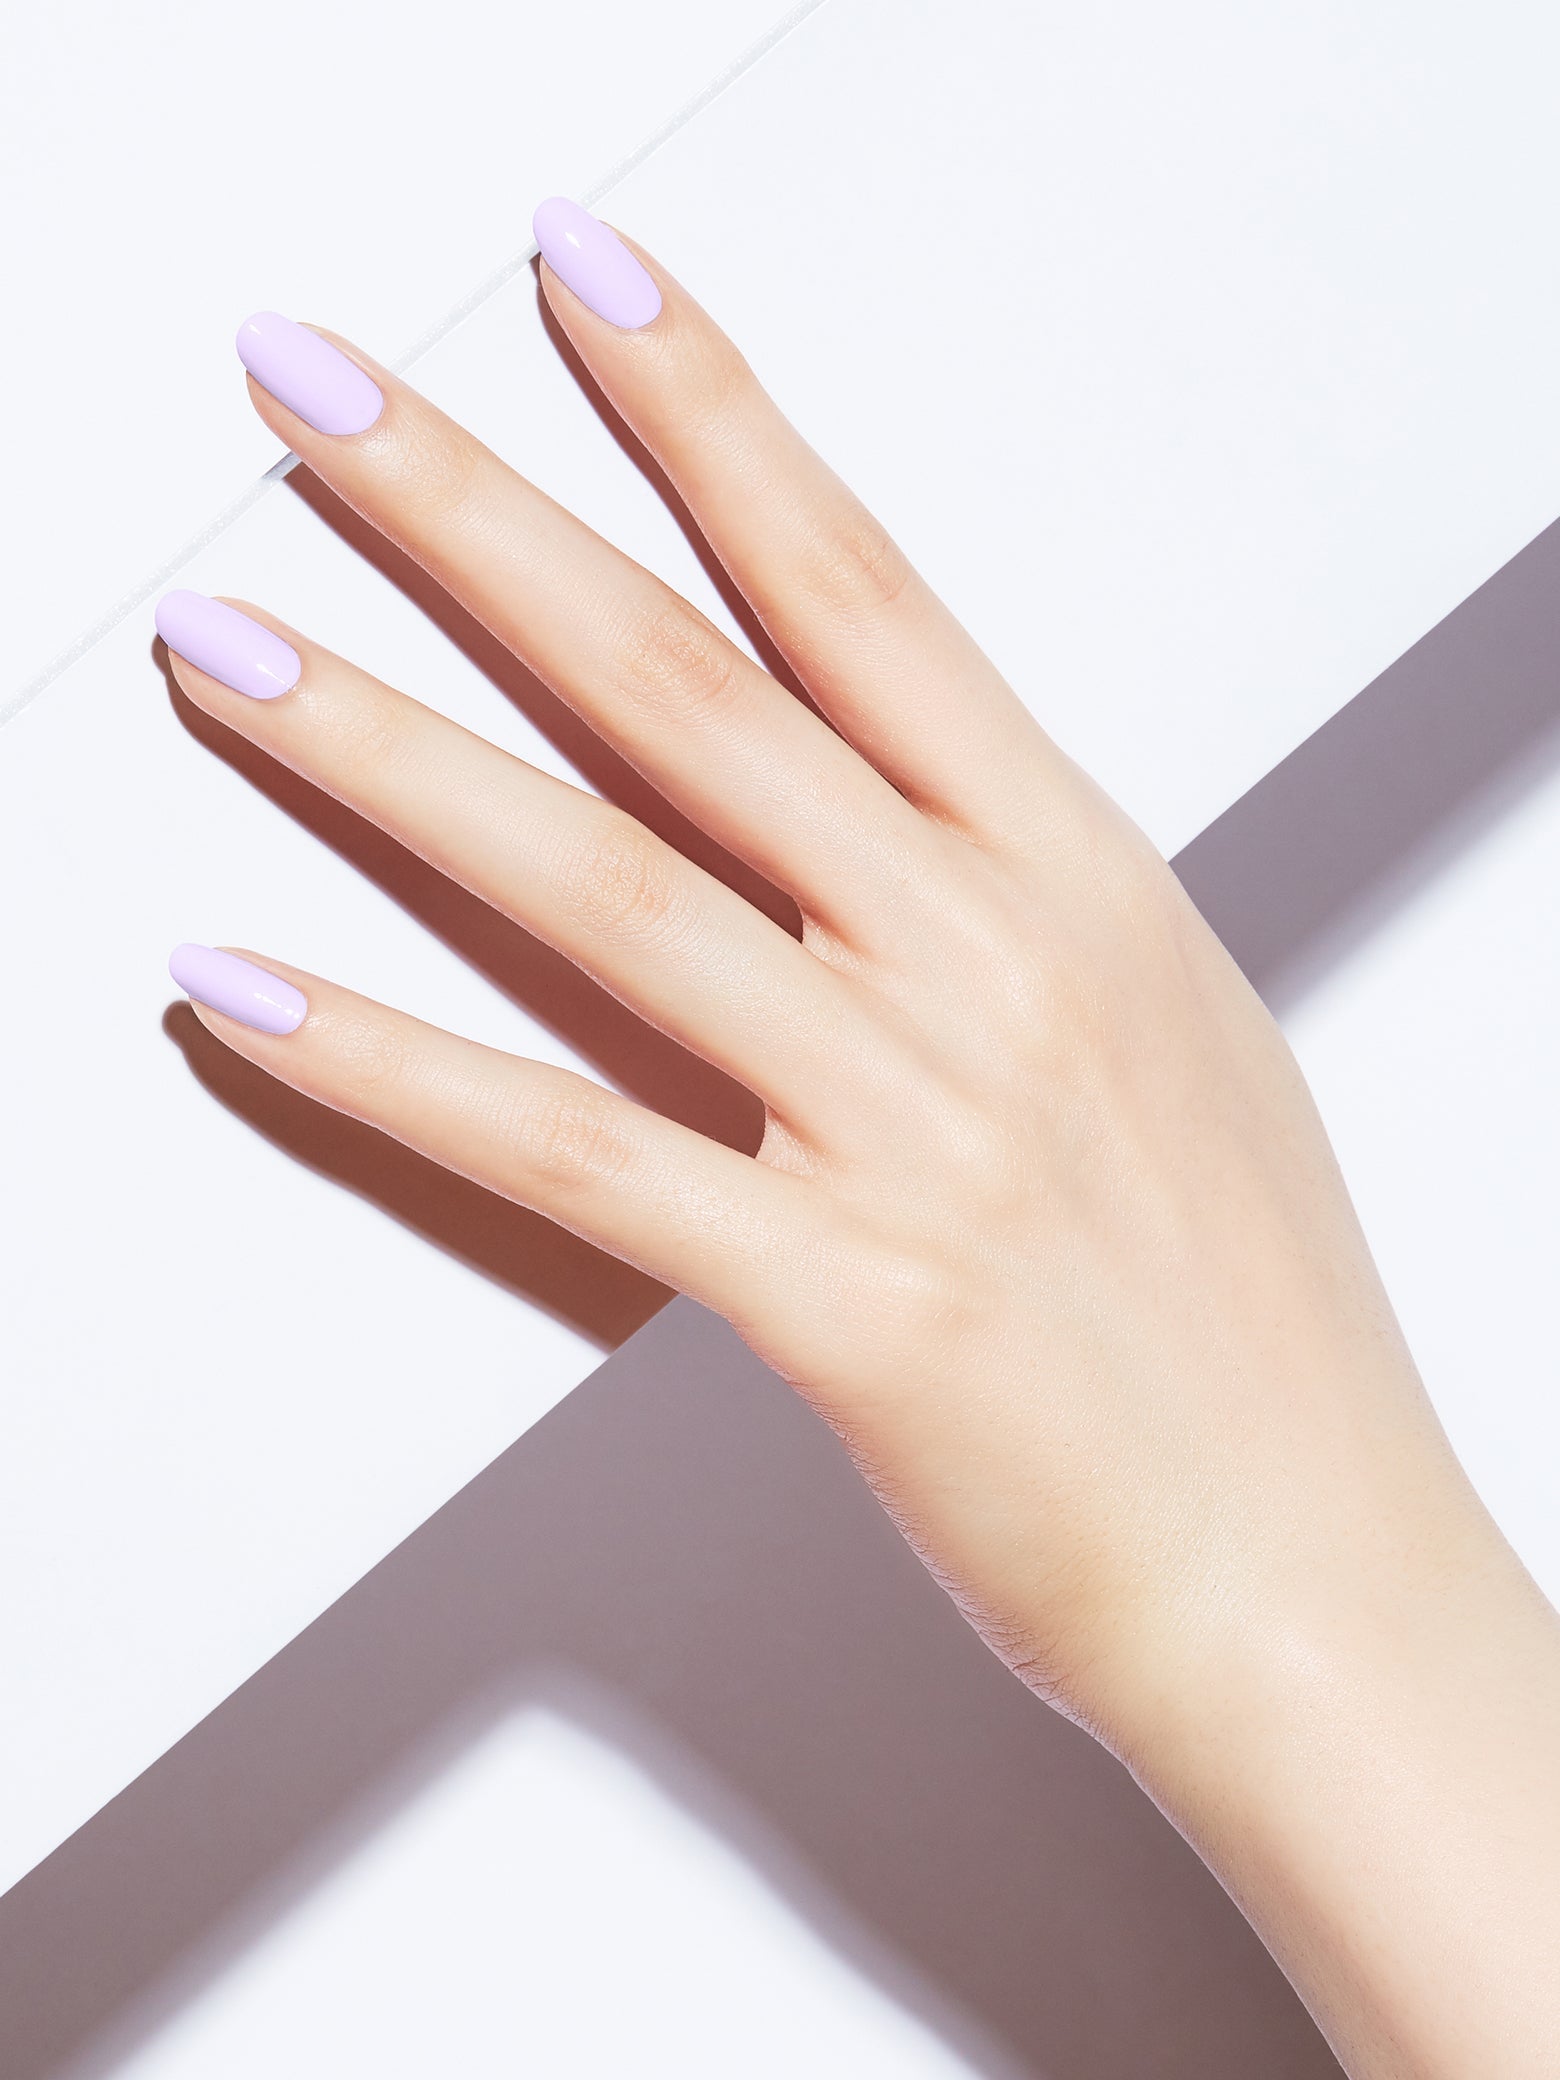 19 Best Longest-Lasting No-Chip Nail Polishes